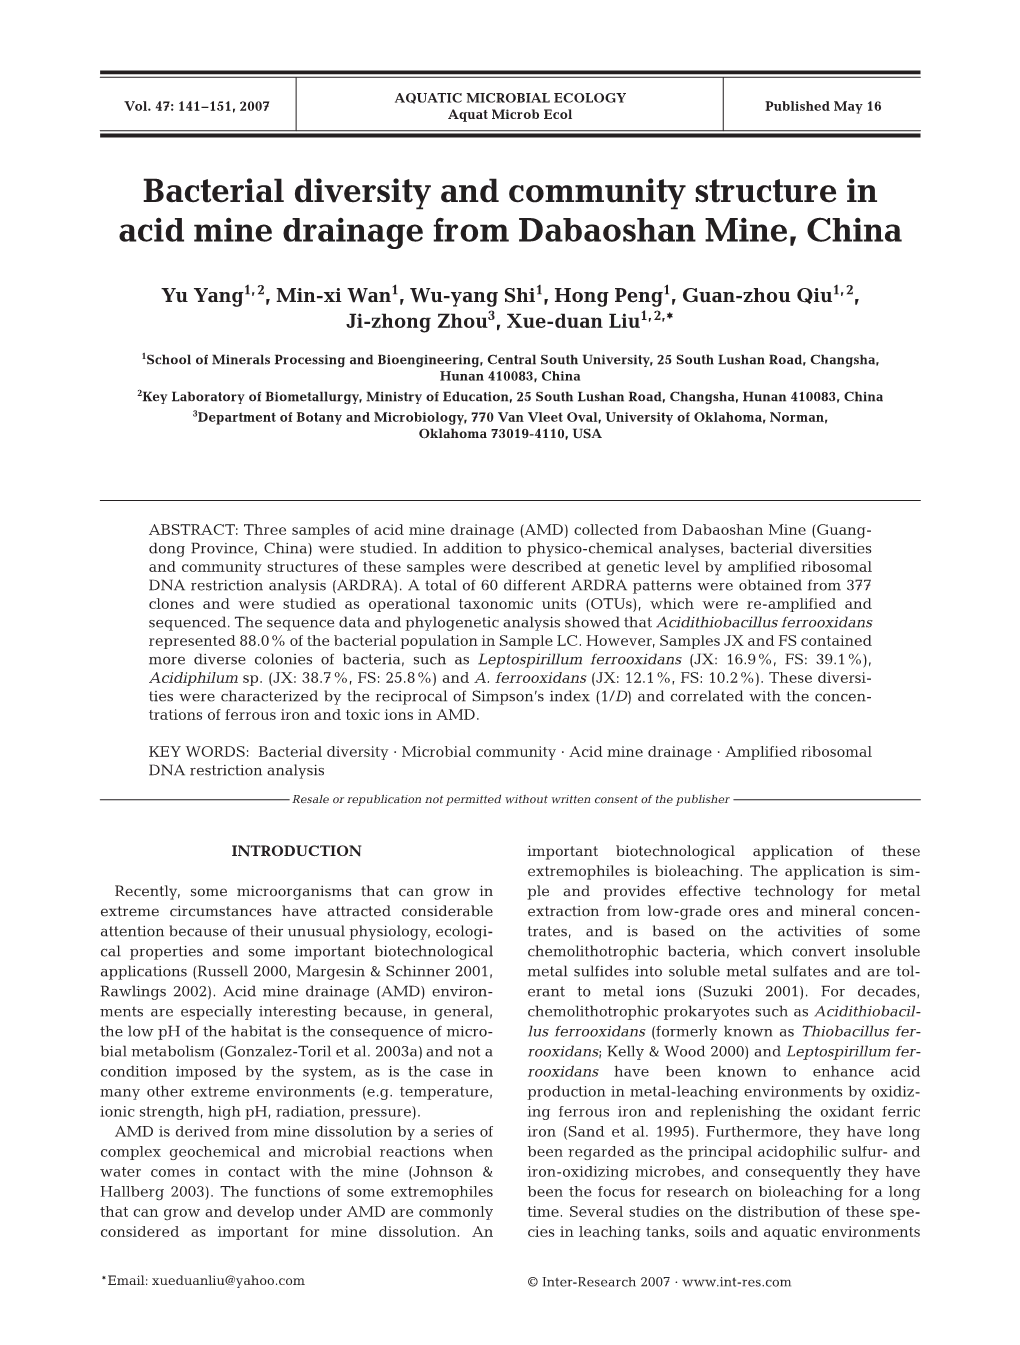 Bacterial Diversity and Community Structure in Acid Mine Drainage from Dabaoshan Mine, China